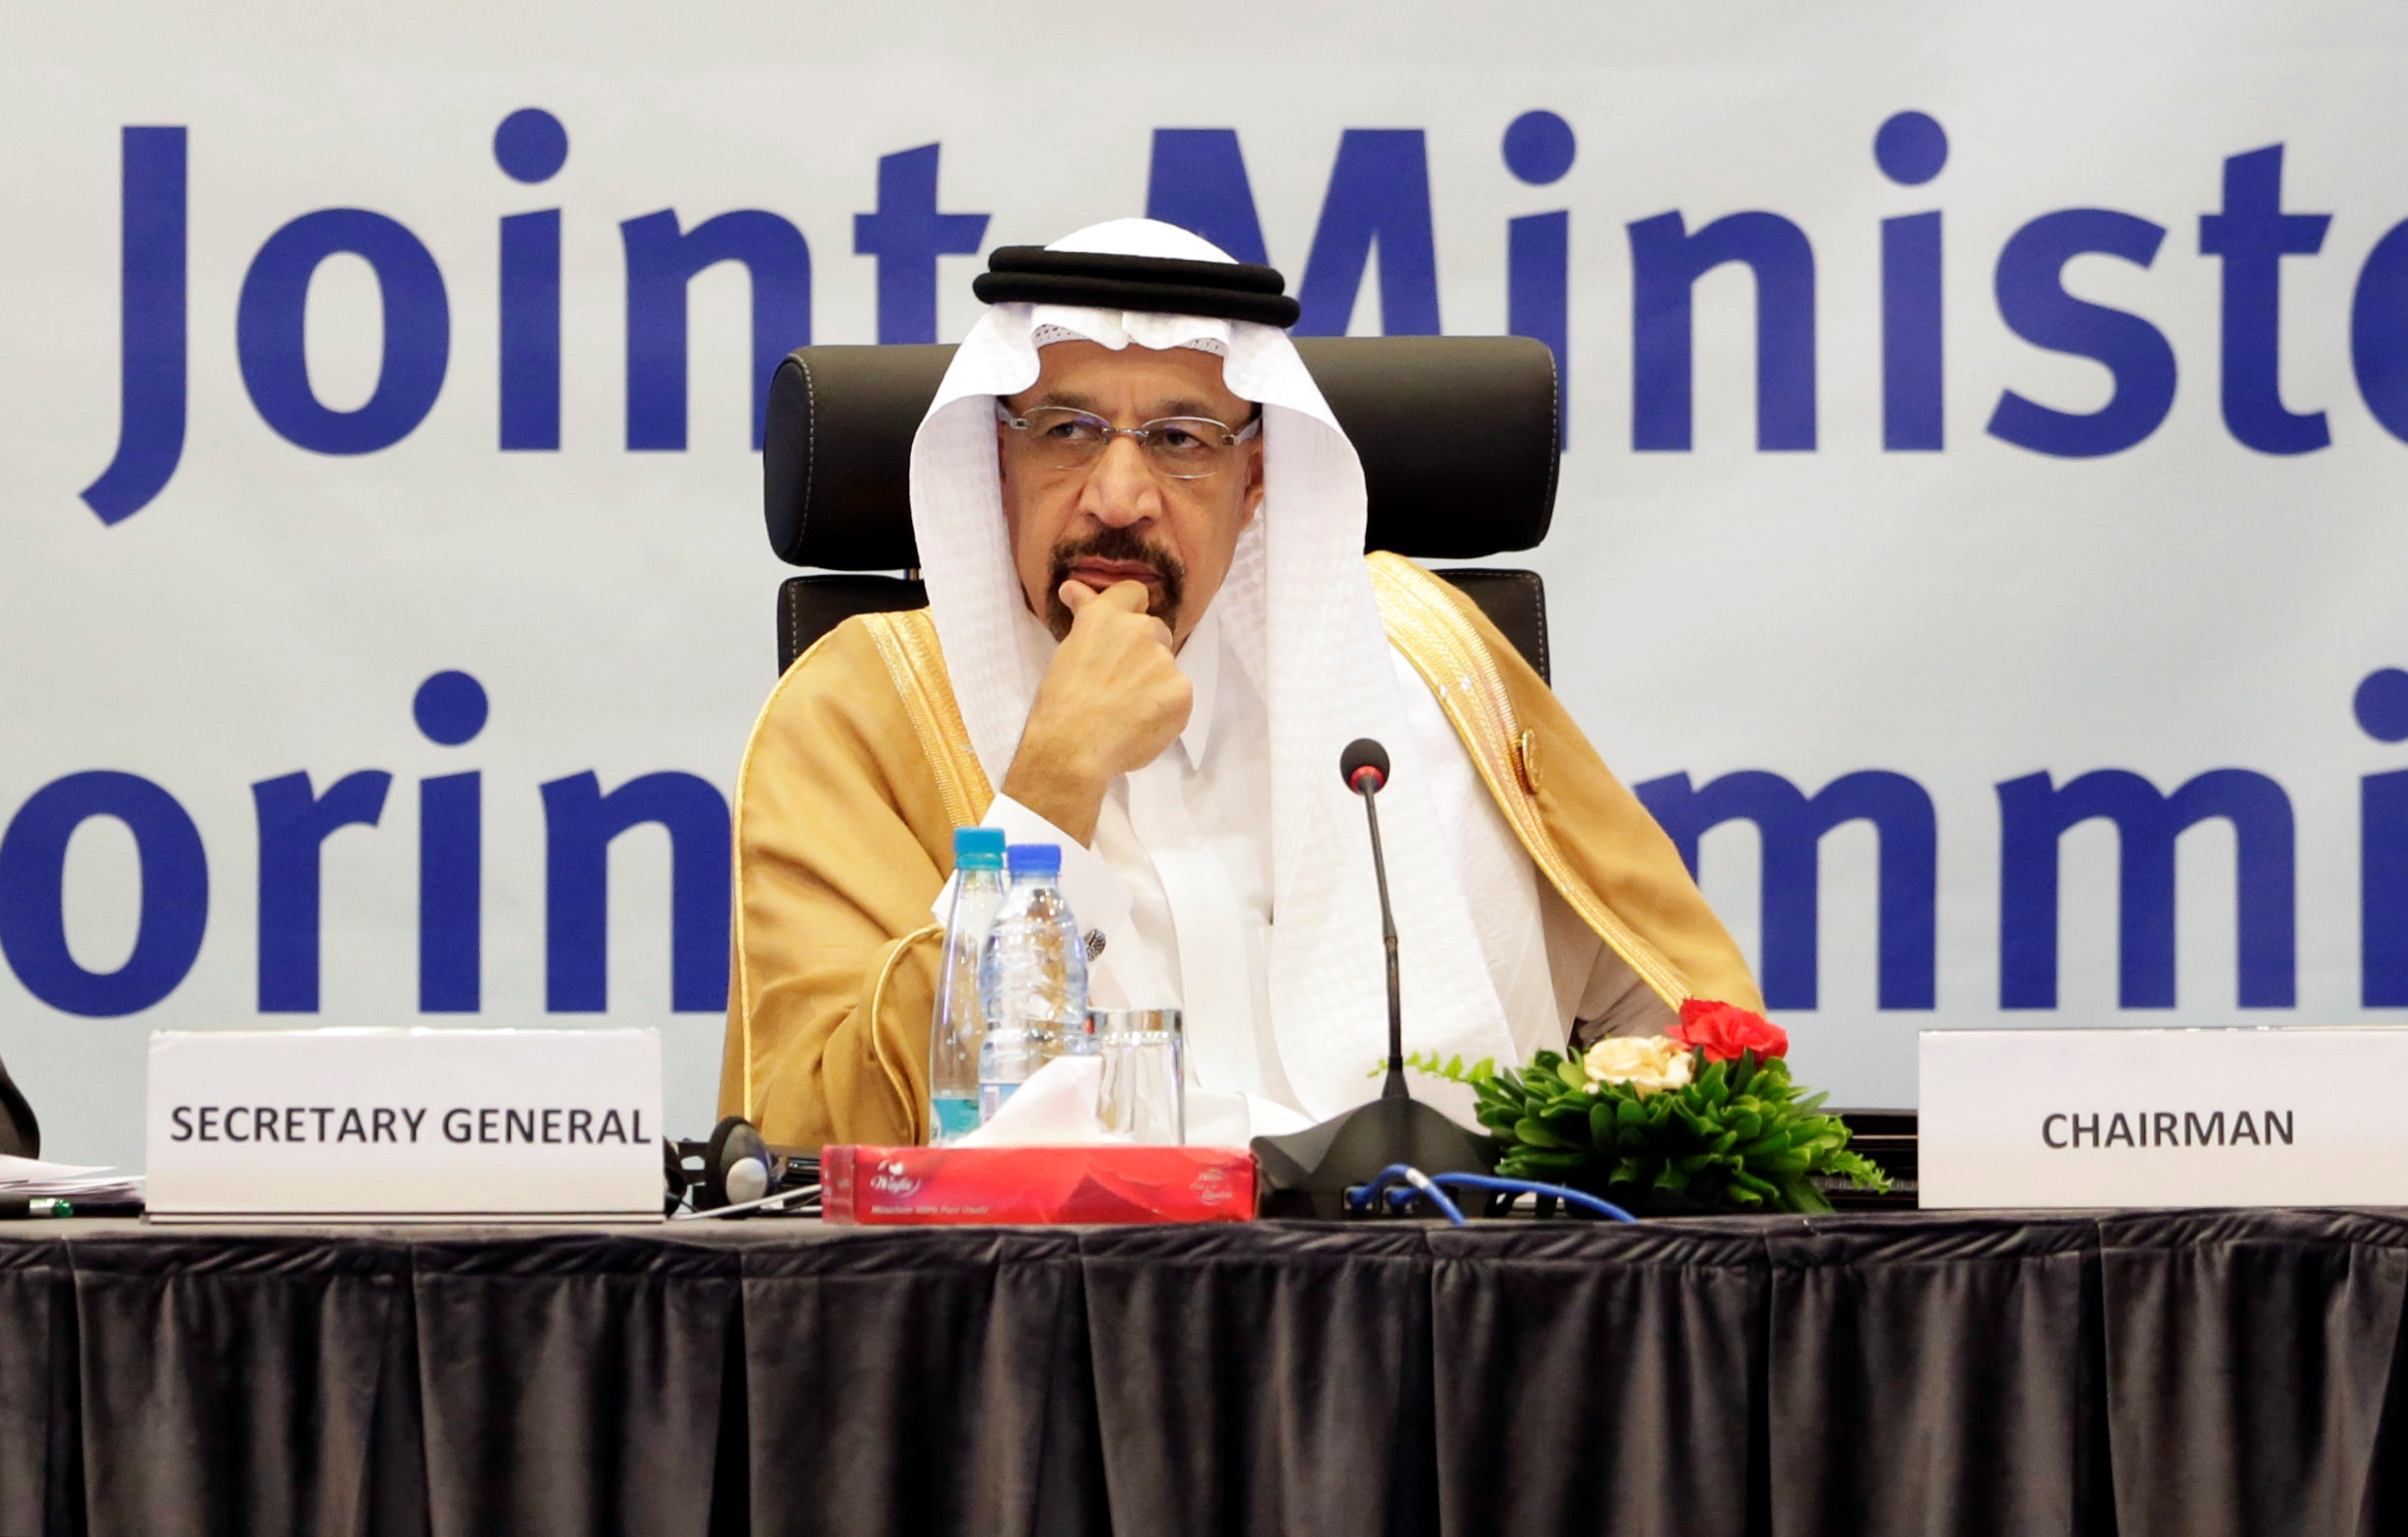 Saudi Arabian Energy Minister Khalid al-Falih during the inaugural session ceremony of the OPEC Ministerial Monitoring Committee in Algiers